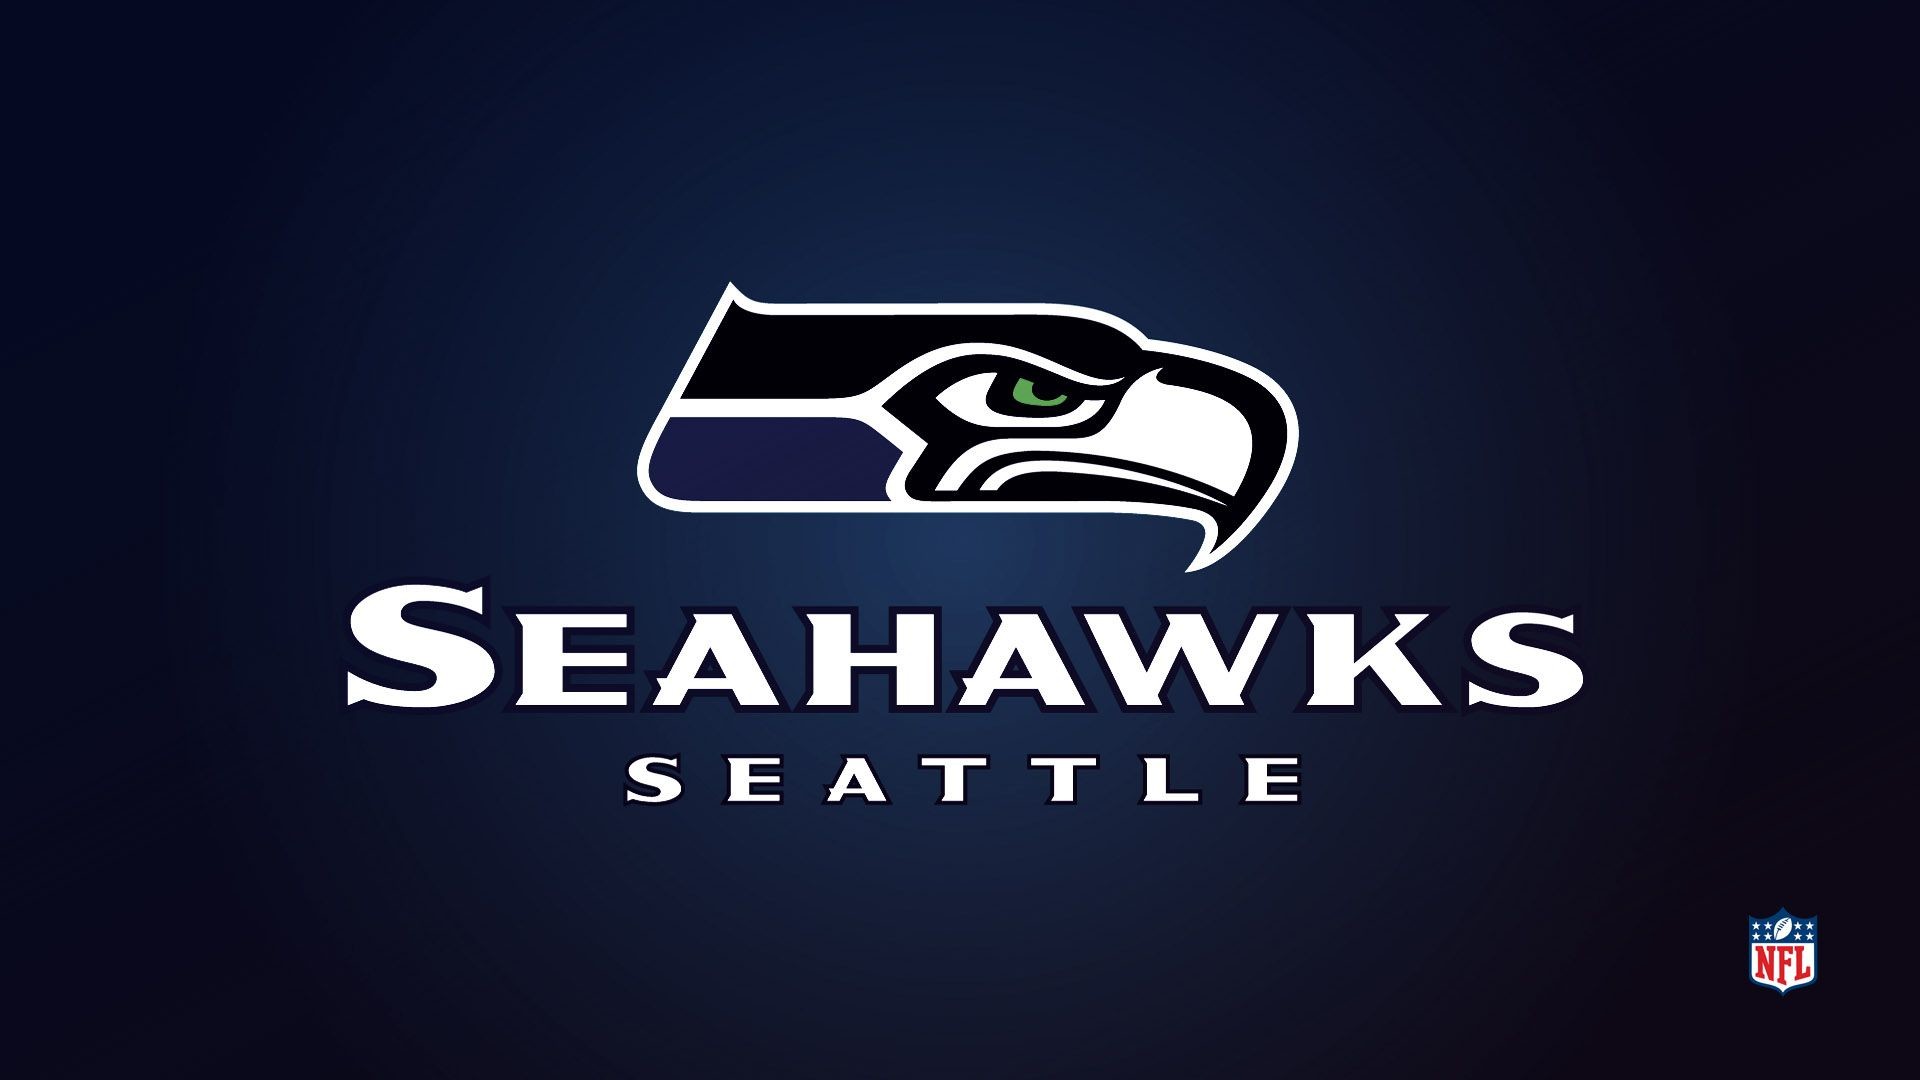 1920x1080 Seattle Seahawks Wallpapers - Wallpaper Cave